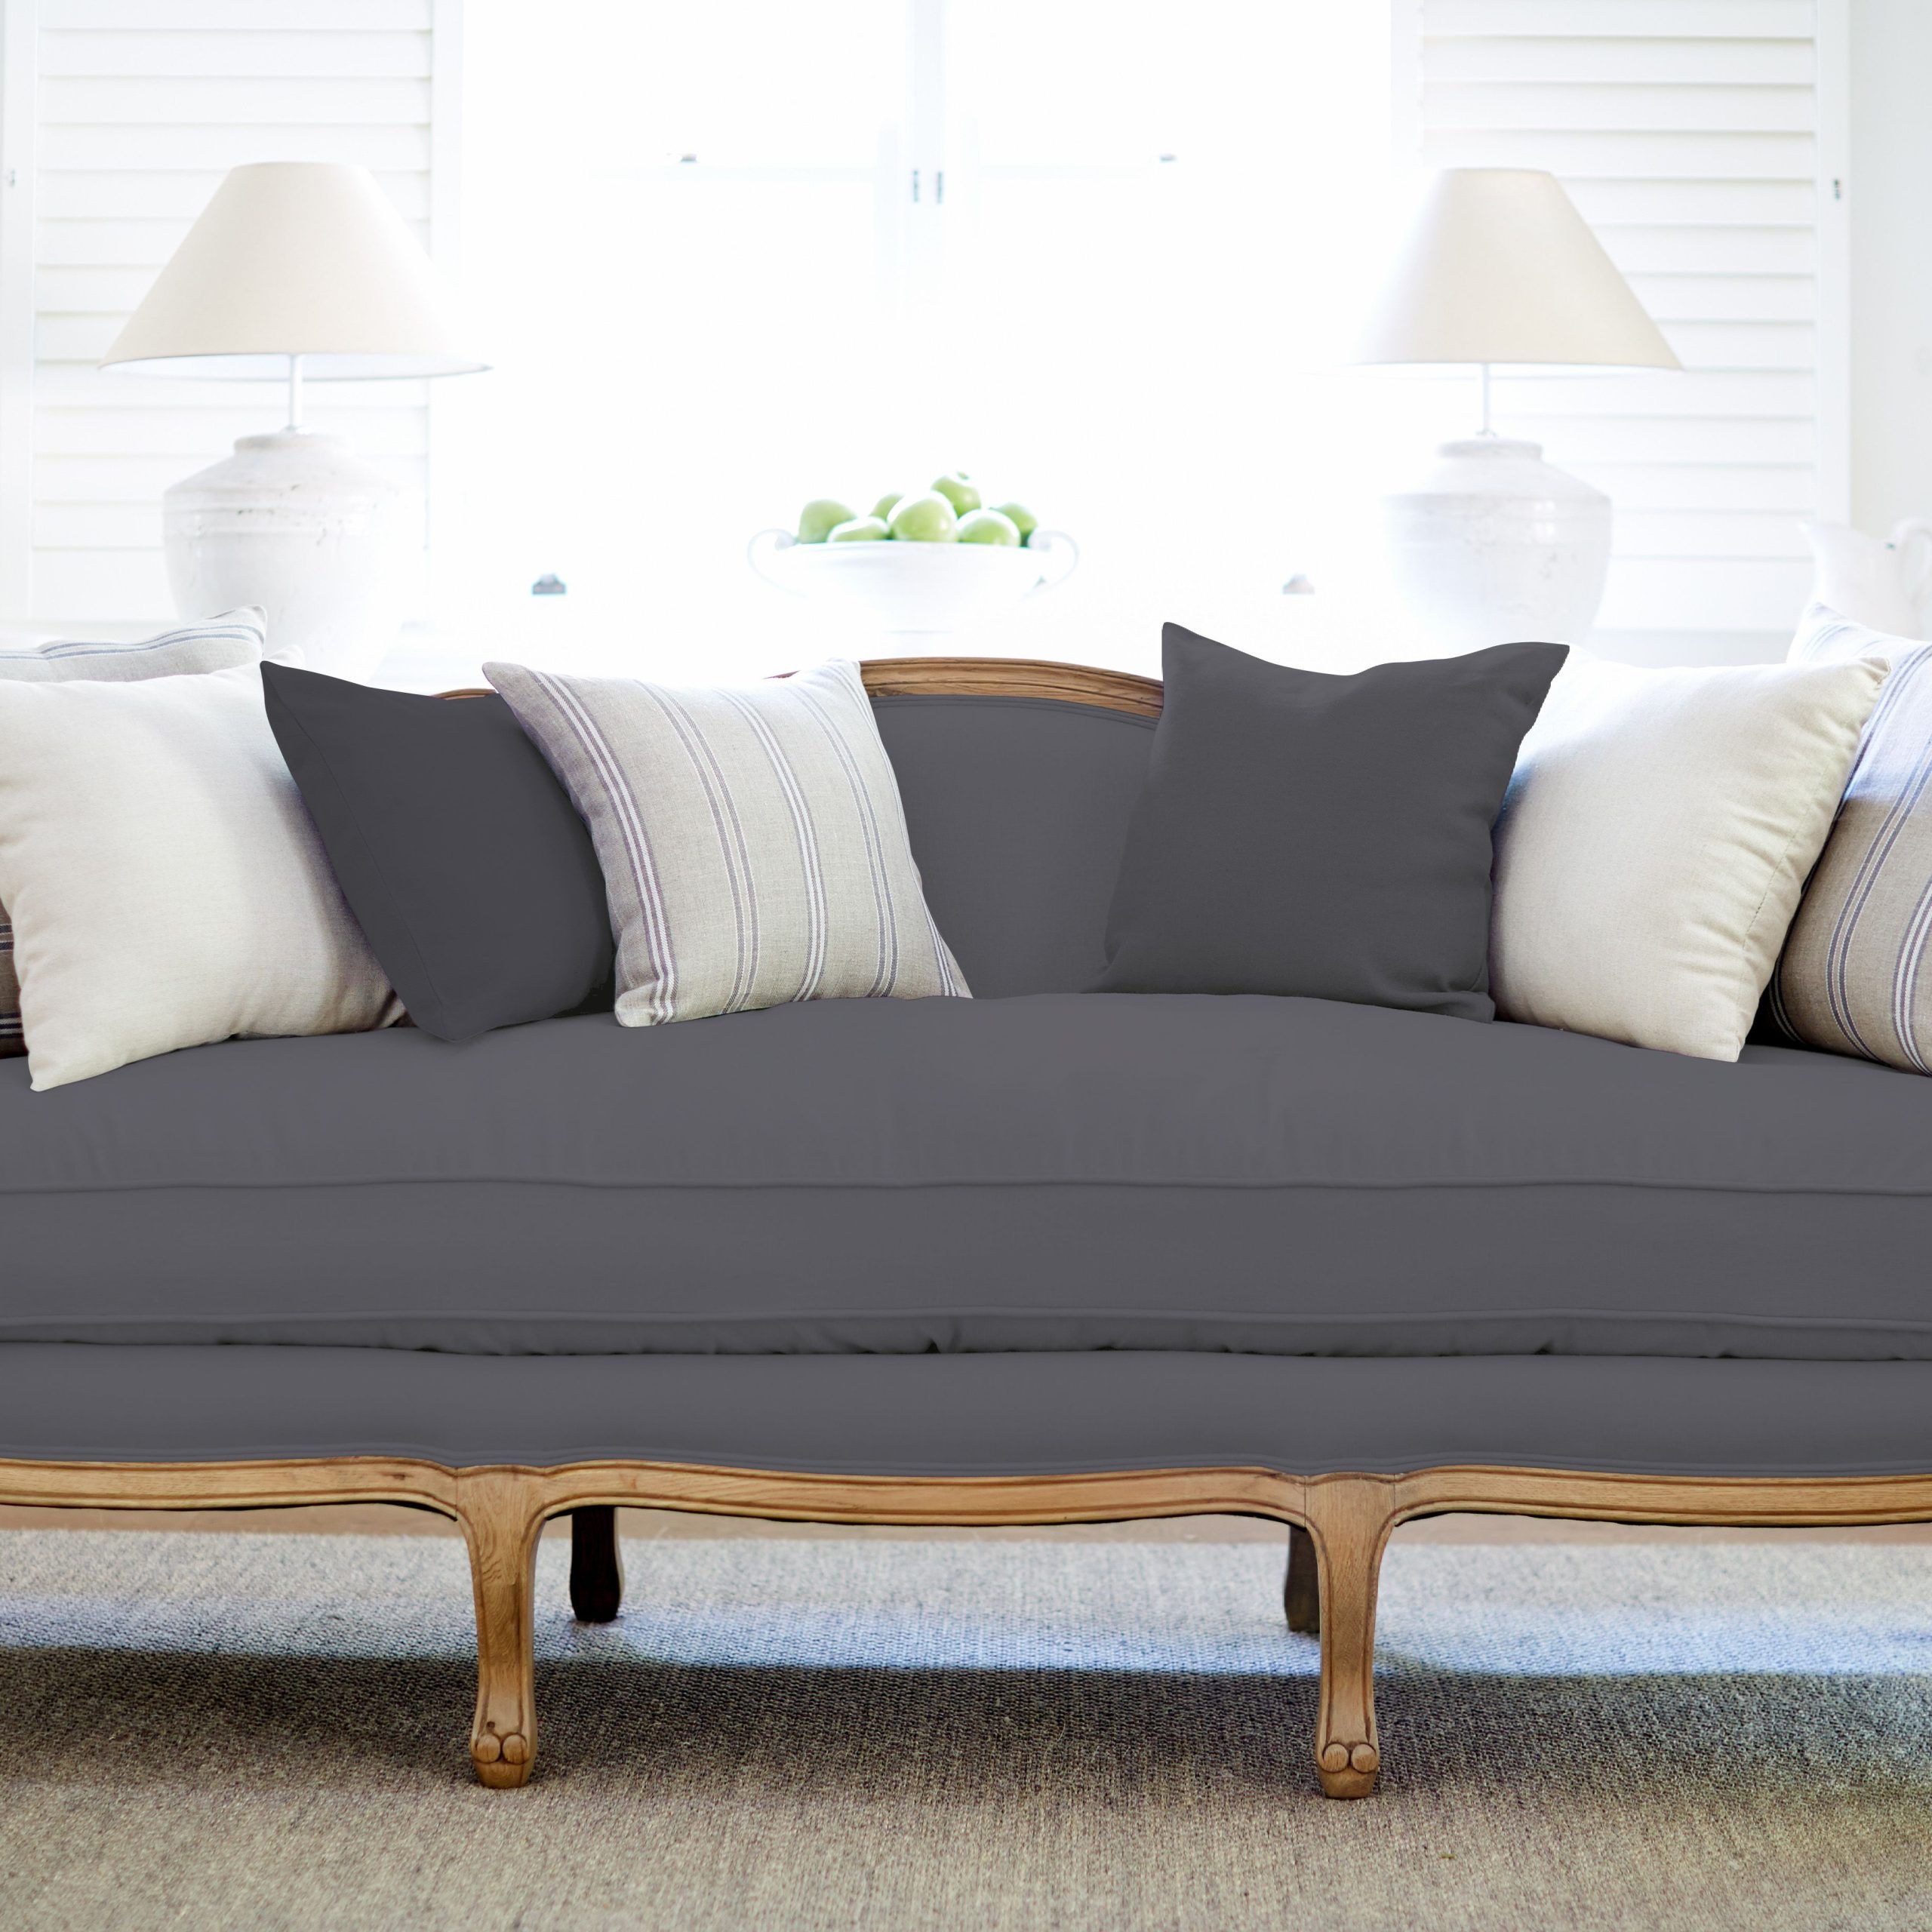 Charcoal Linen Sofa | Sofa Design, Sofa Styling, Sofa Makeover With Regard To Light Charcoal Linen Sofas (View 11 of 20)